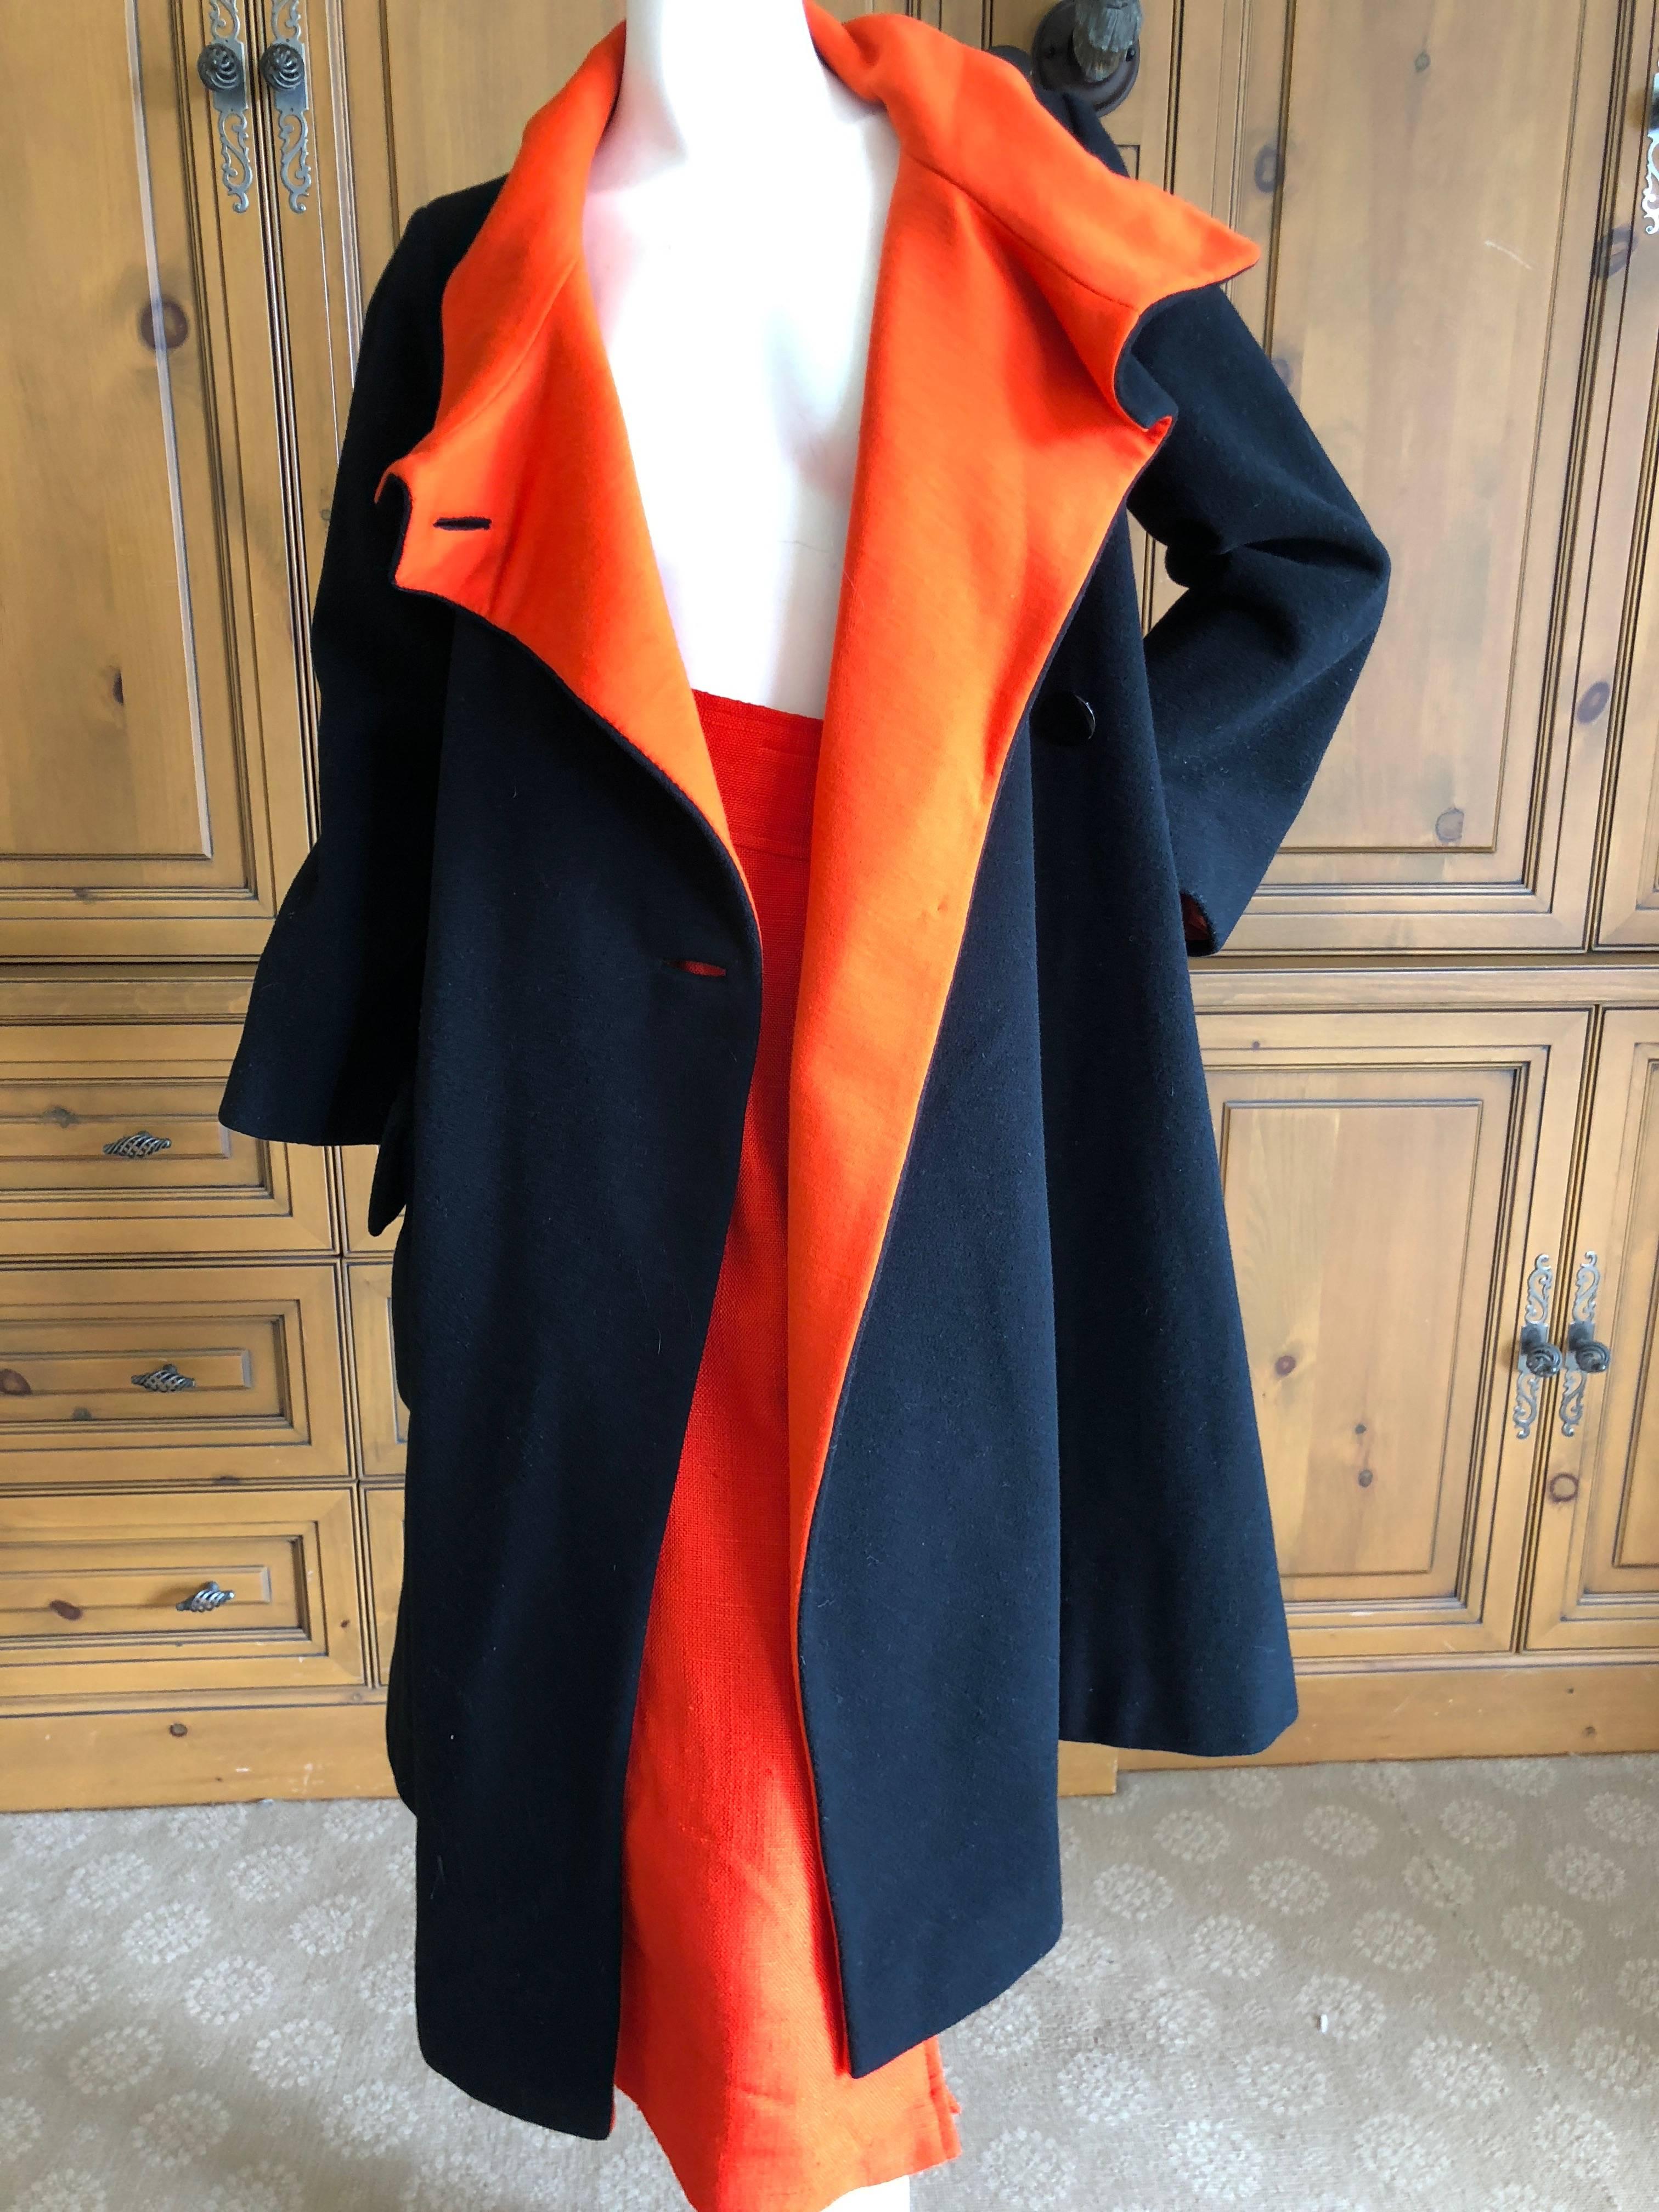 Cardinali 1970 Black Wool Coat with Orange Lining and Matching Skirt In Excellent Condition For Sale In Cloverdale, CA